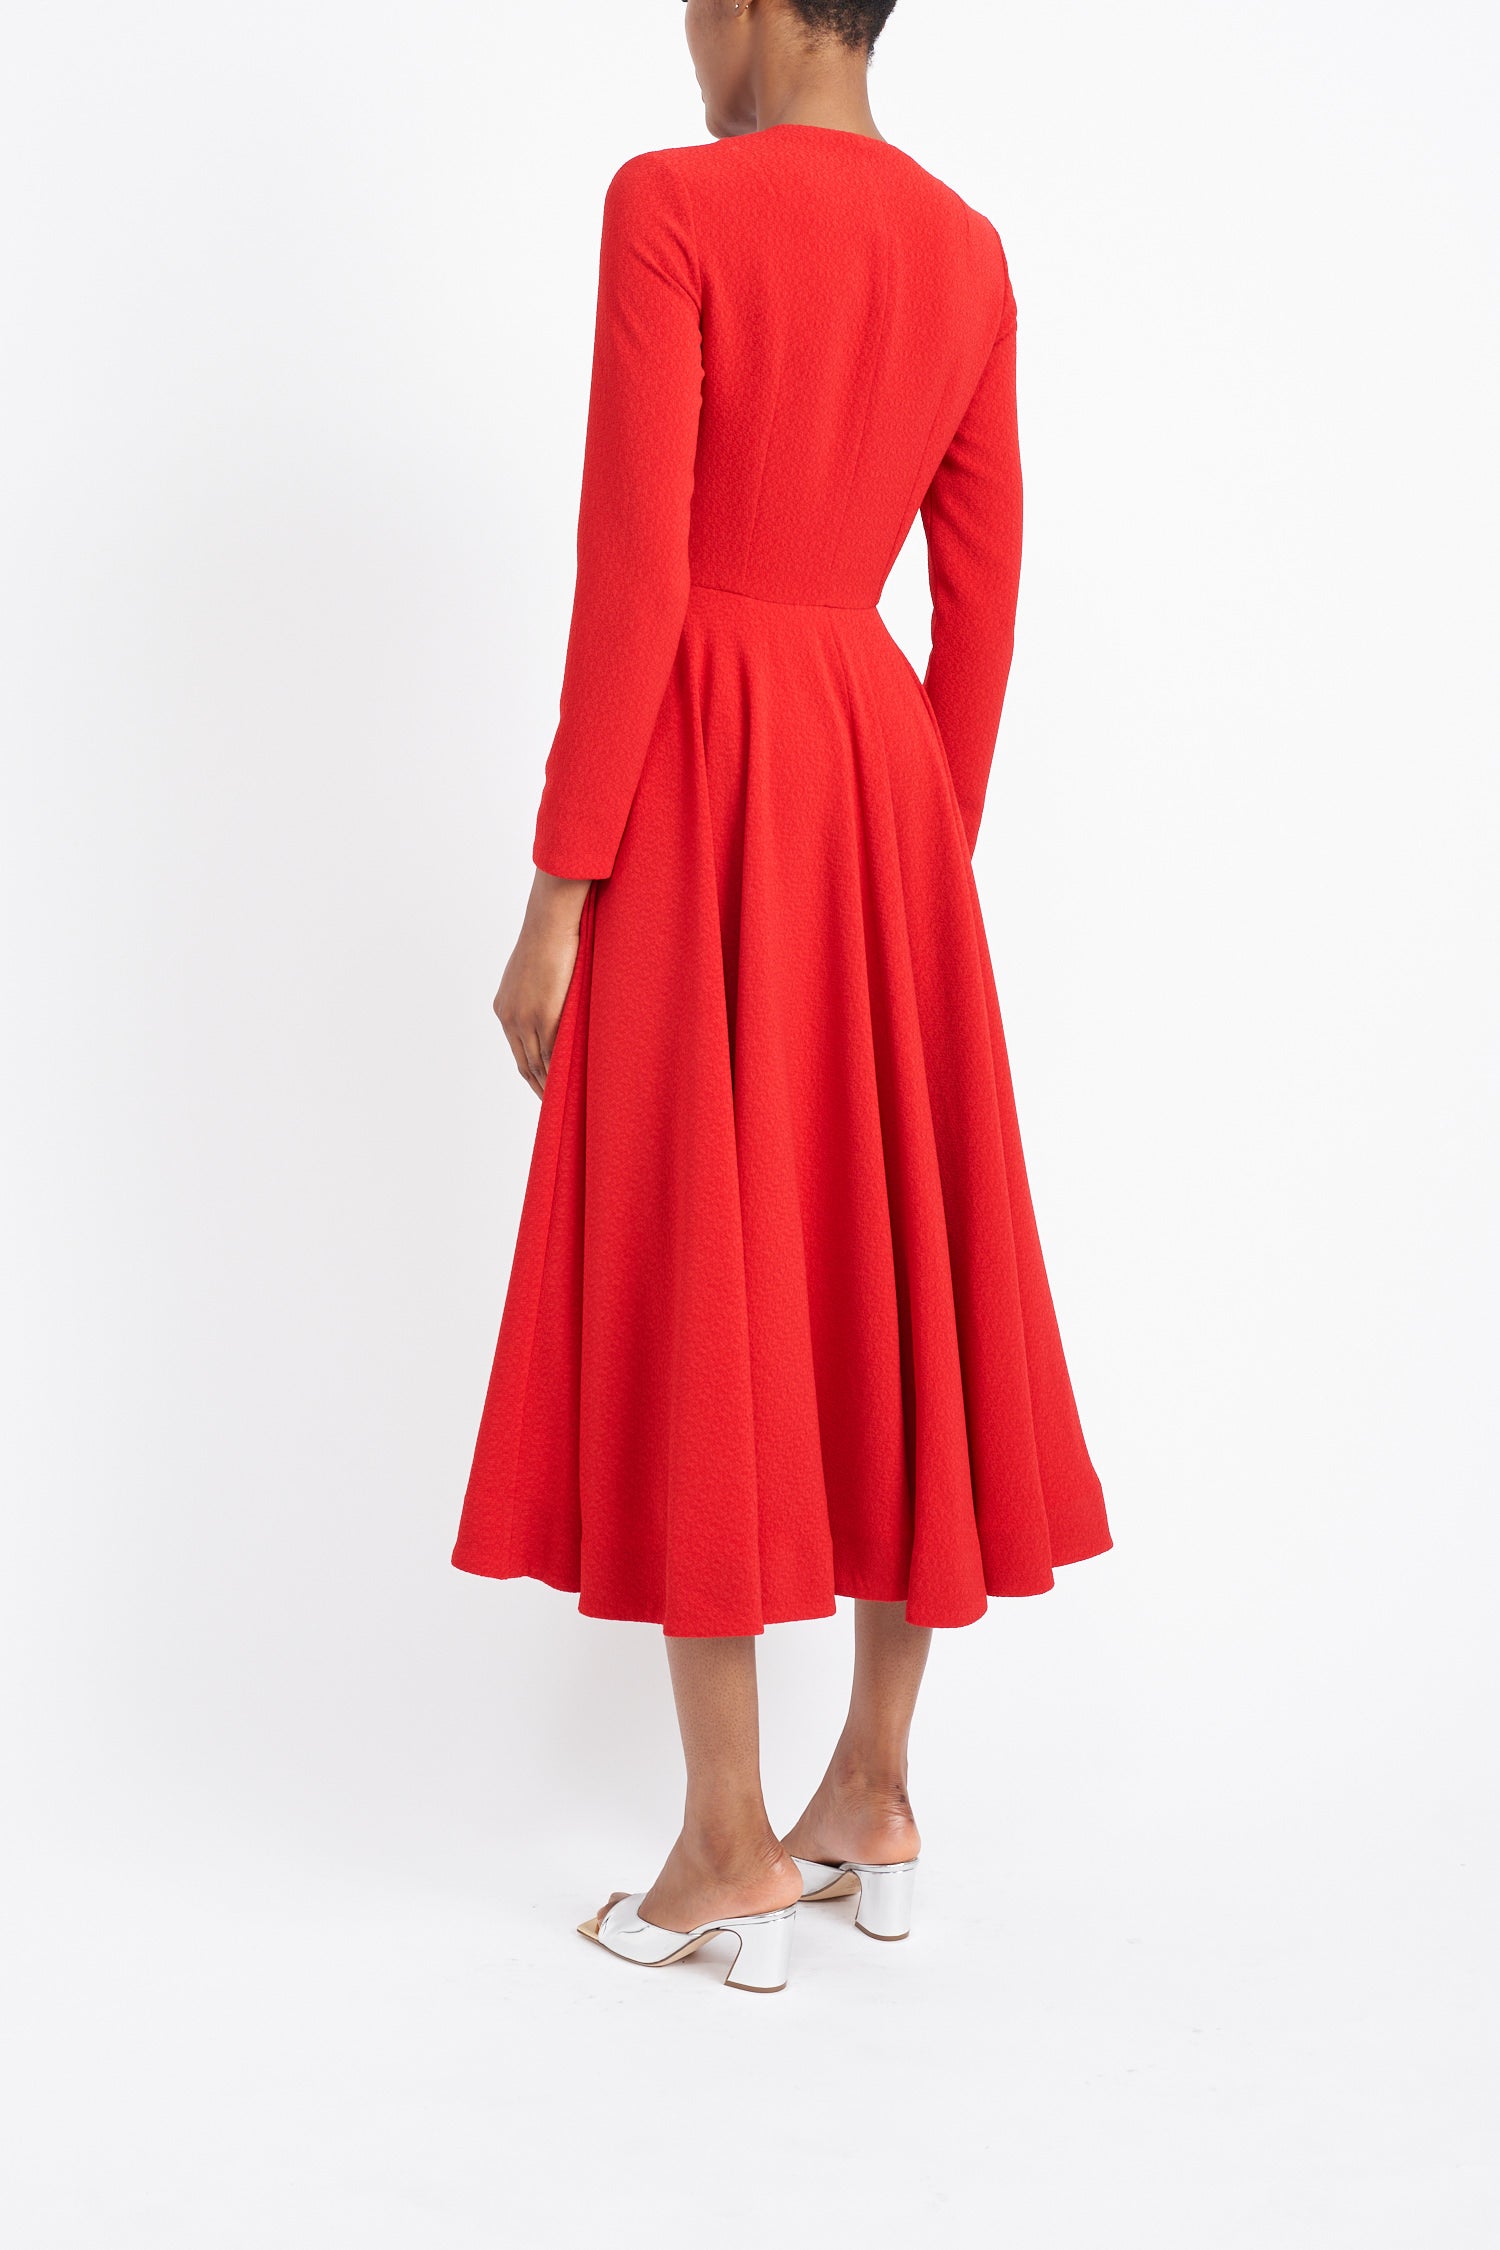 CASS RED SUSTAINABILY SOURCED CADY DRESS